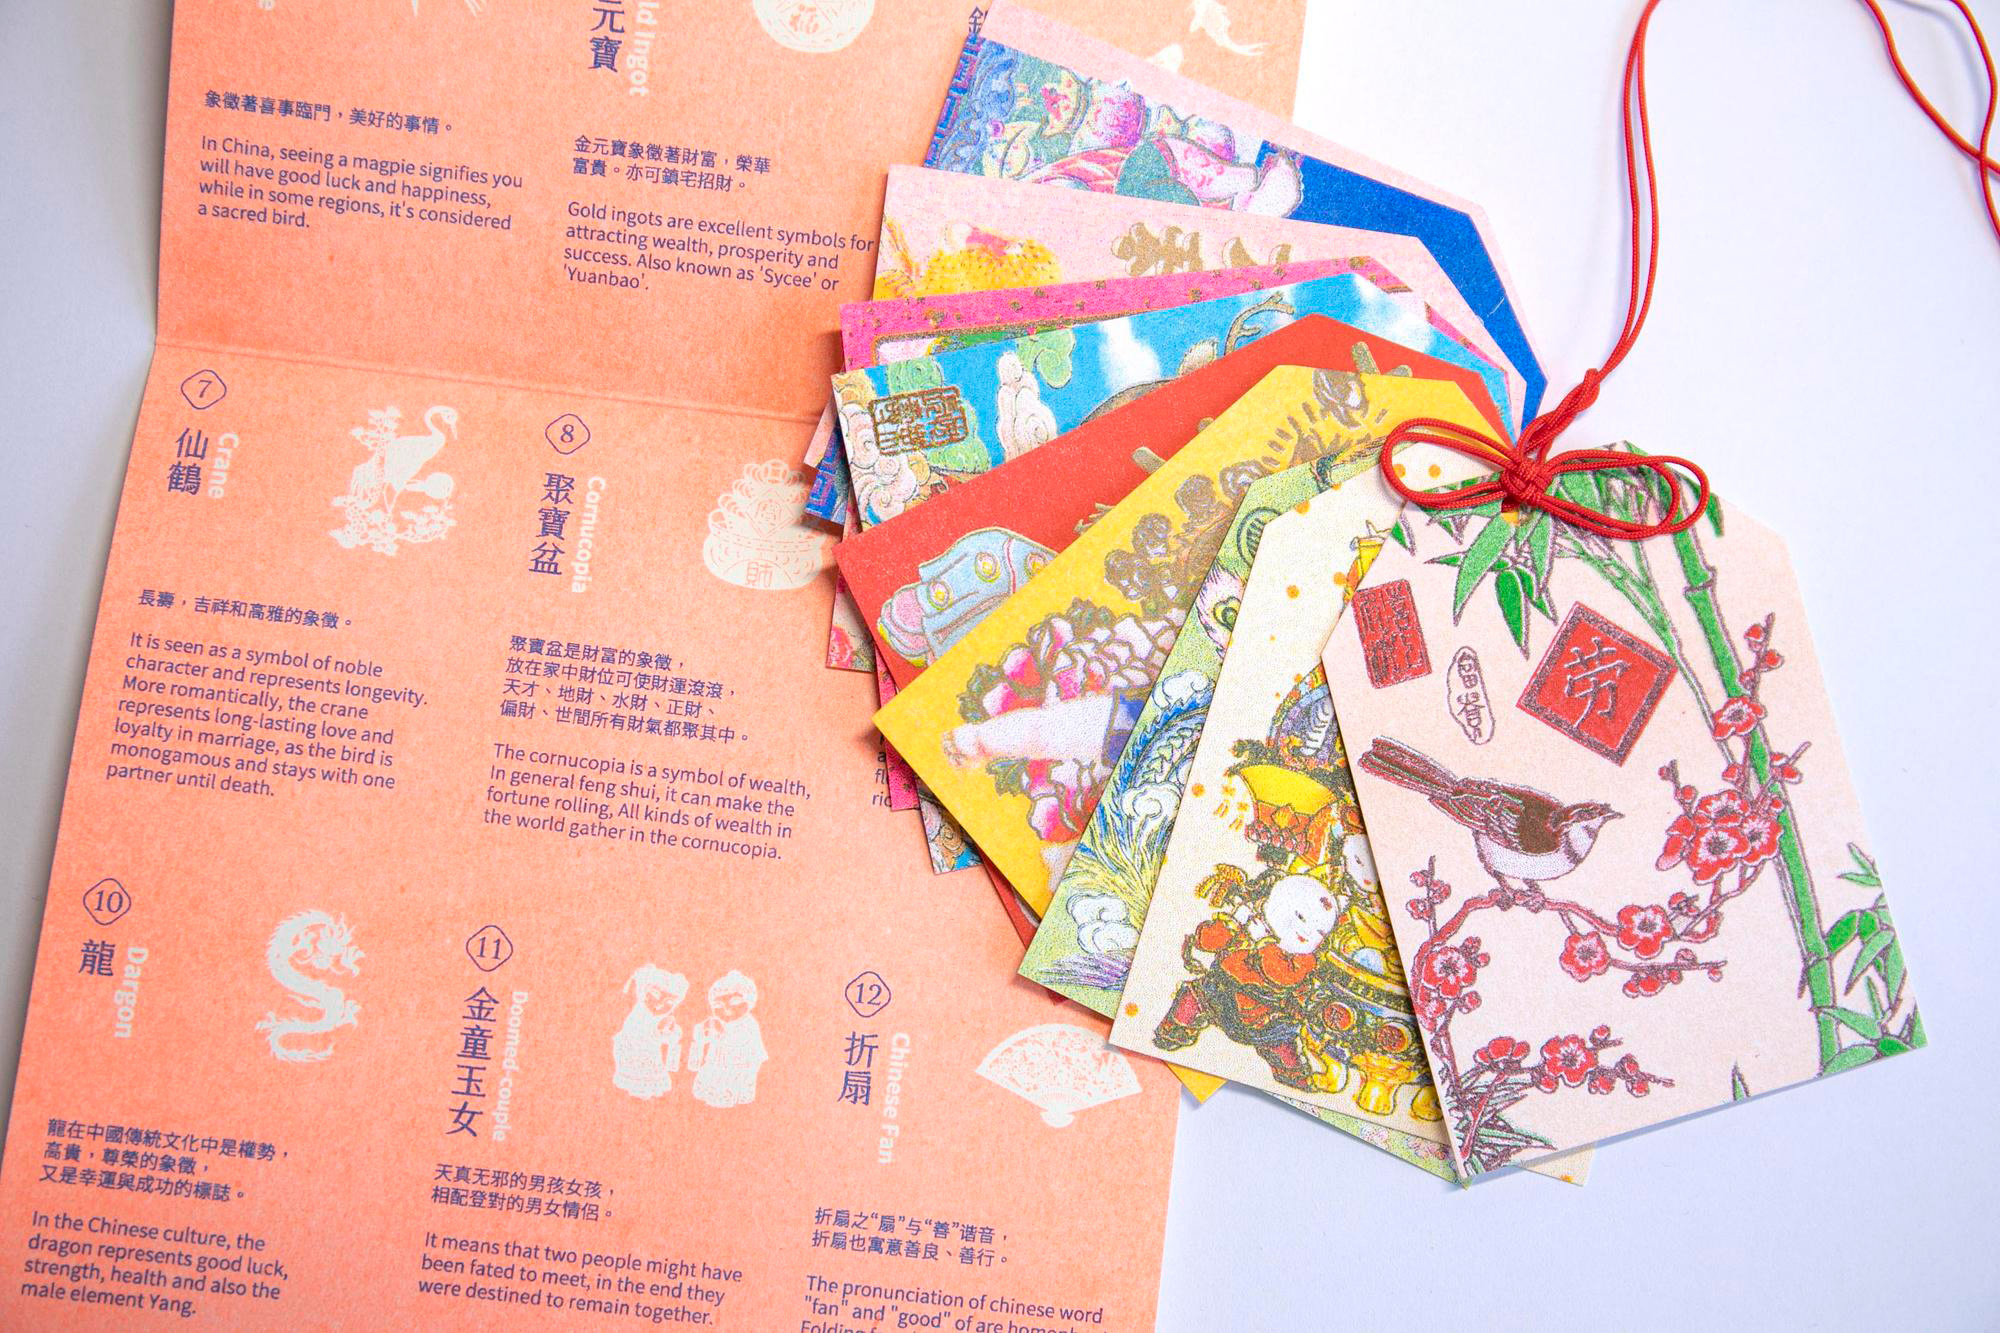 A set colorful cloth labels tied together by a red string. There is also an unfolded orange card with different pictograms and Asian text.